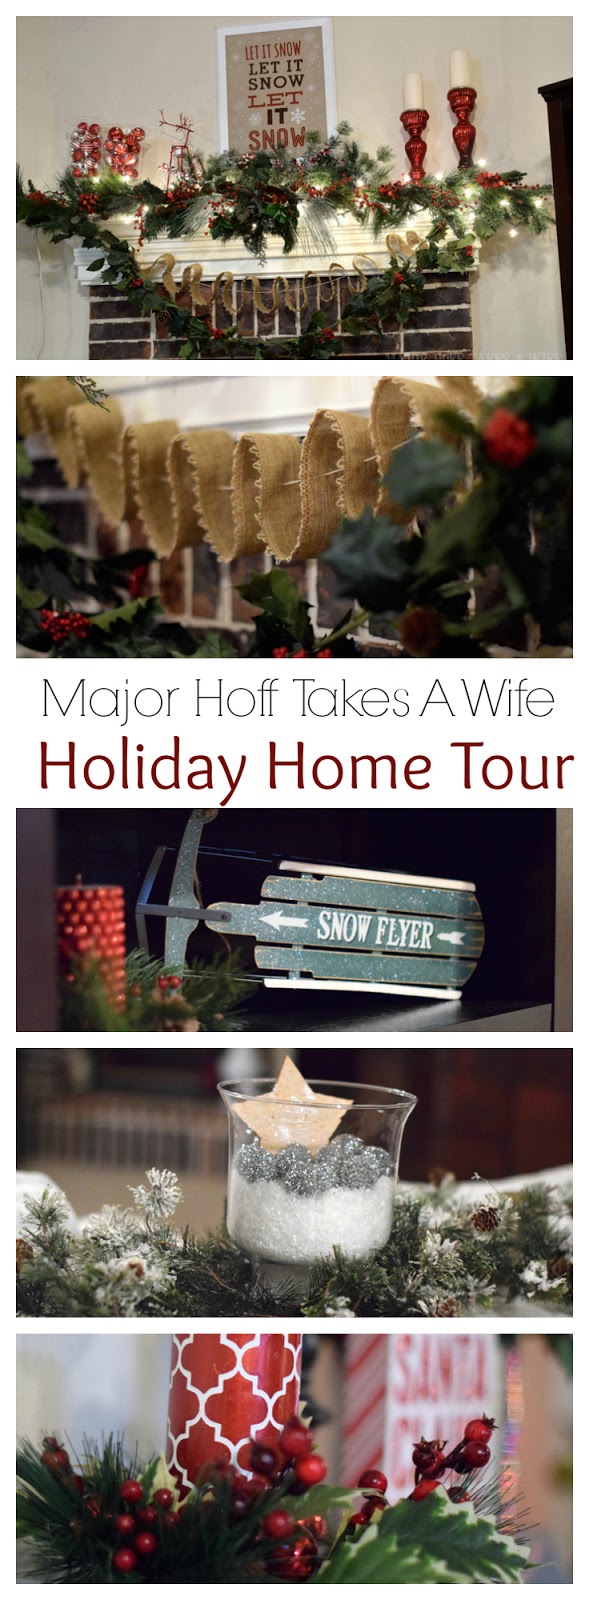 Major Hoff Takes A Wife Holiday Home Tour 2014. Part of the Procrastinators Holiday Blog Hop. Enjoy!